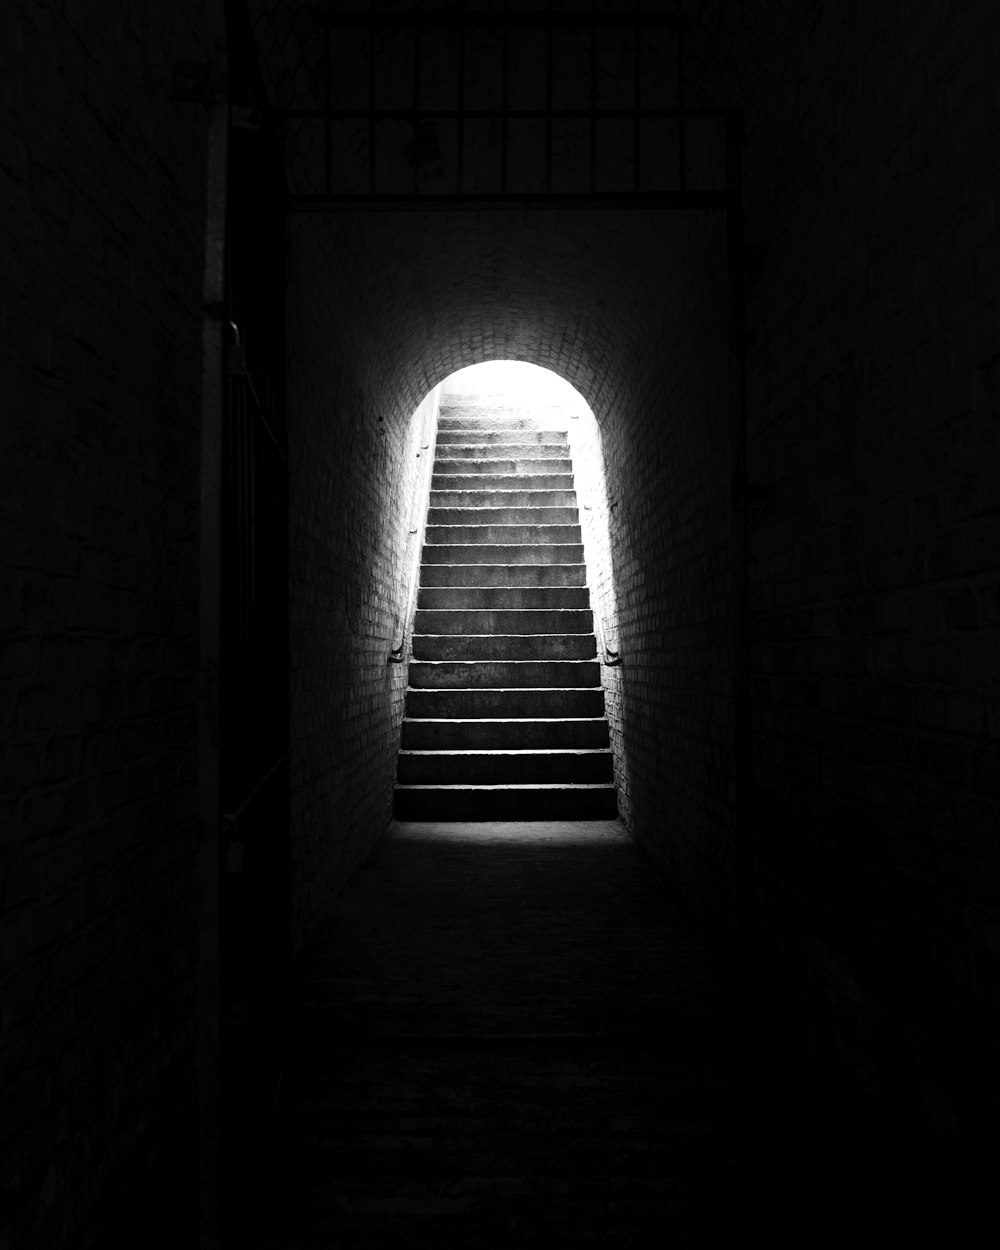 a dark tunnel with stairs leading up to the light